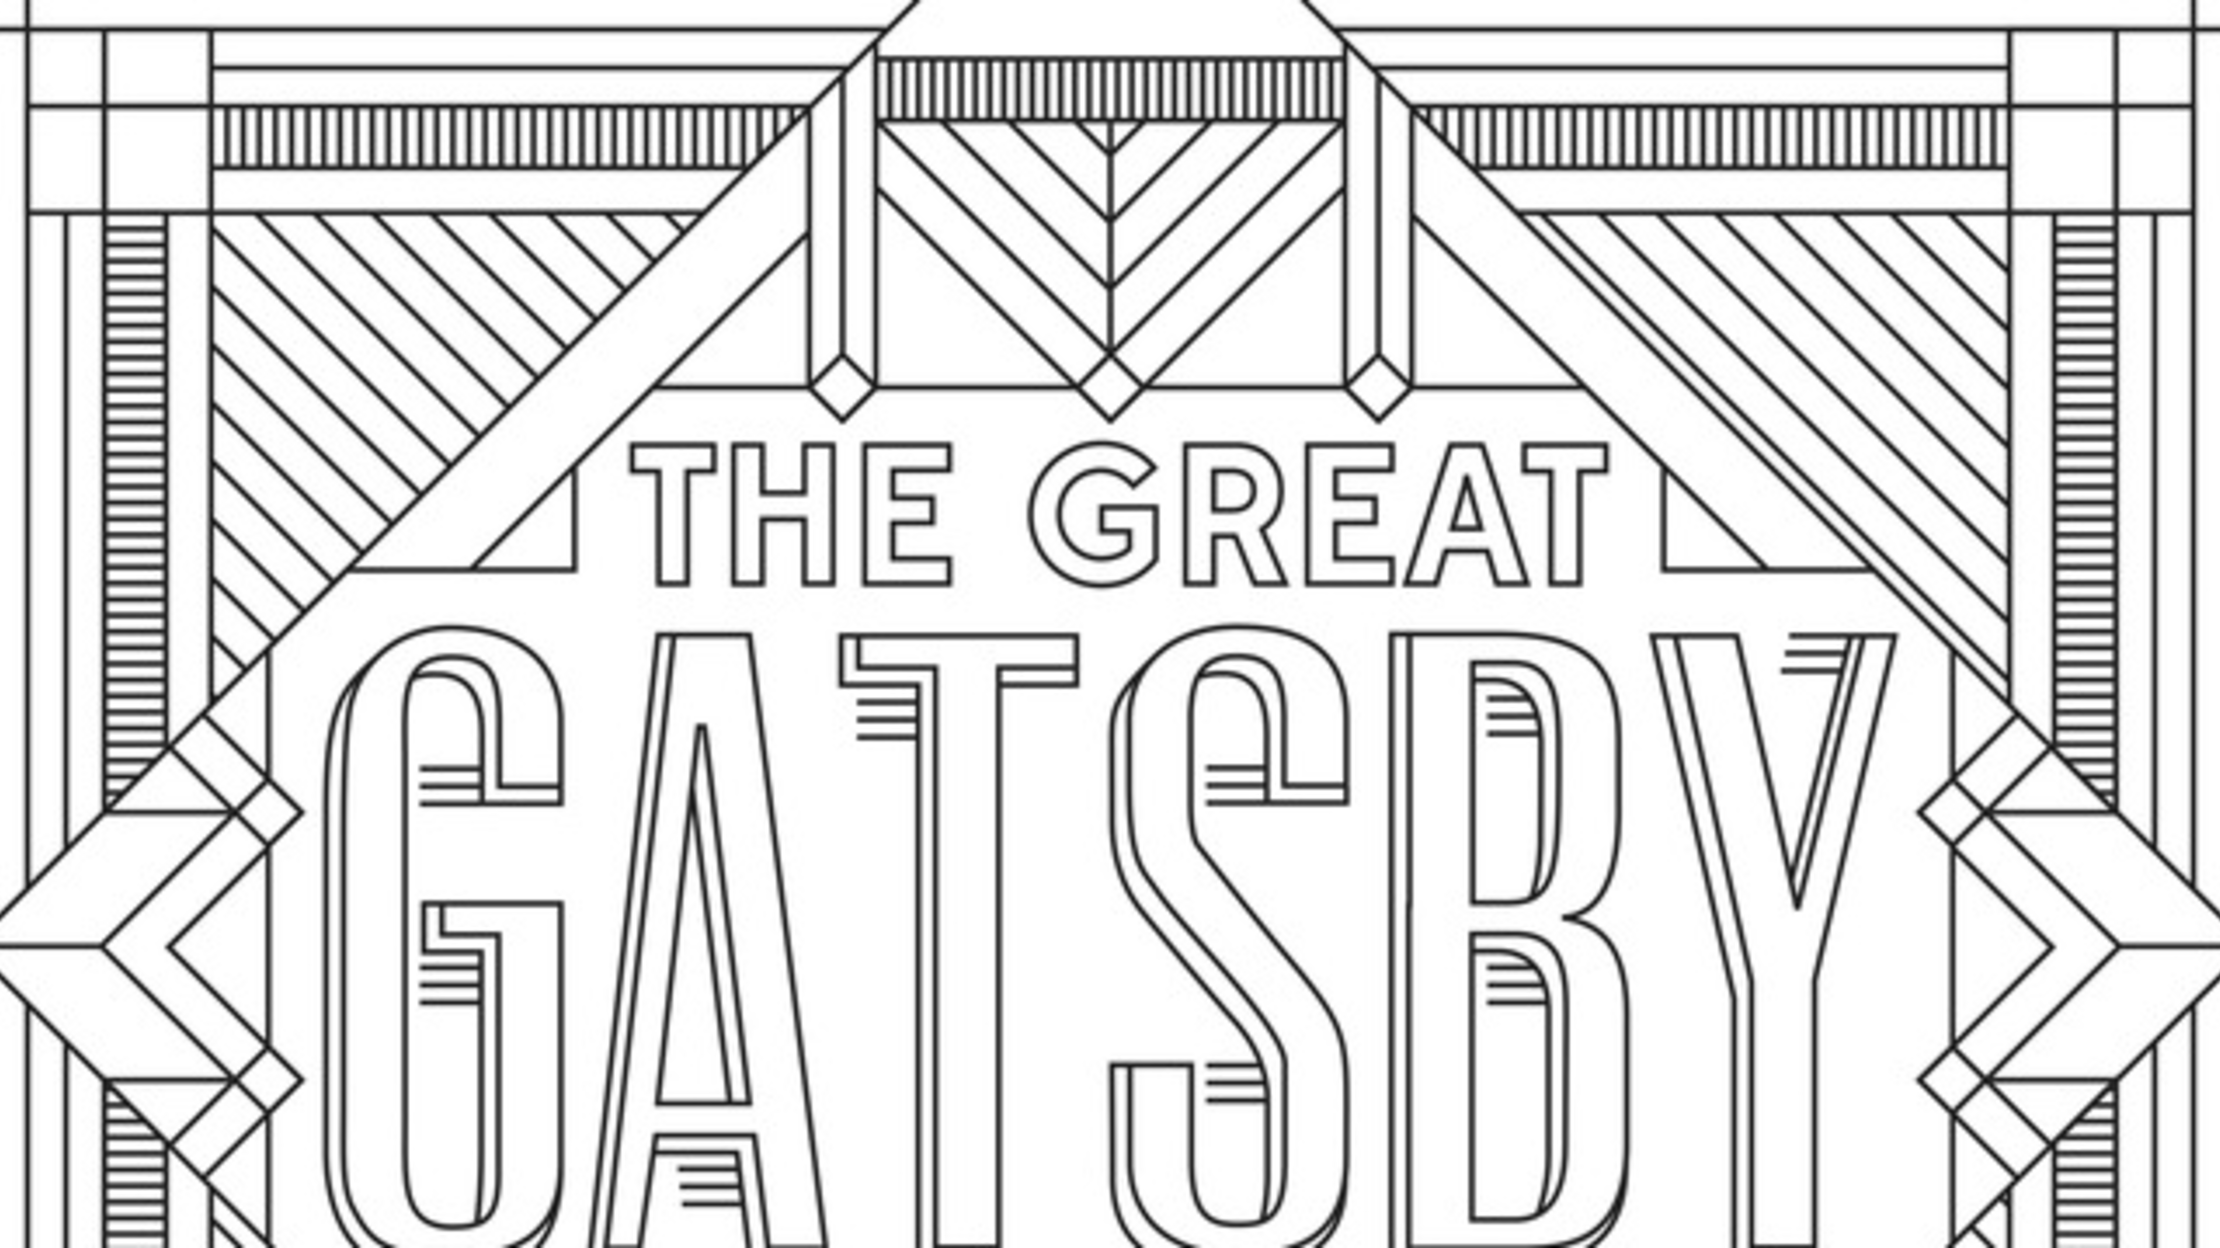 Download Get Creative With Coloring Pages Inspired by Classic Books | Mental Floss